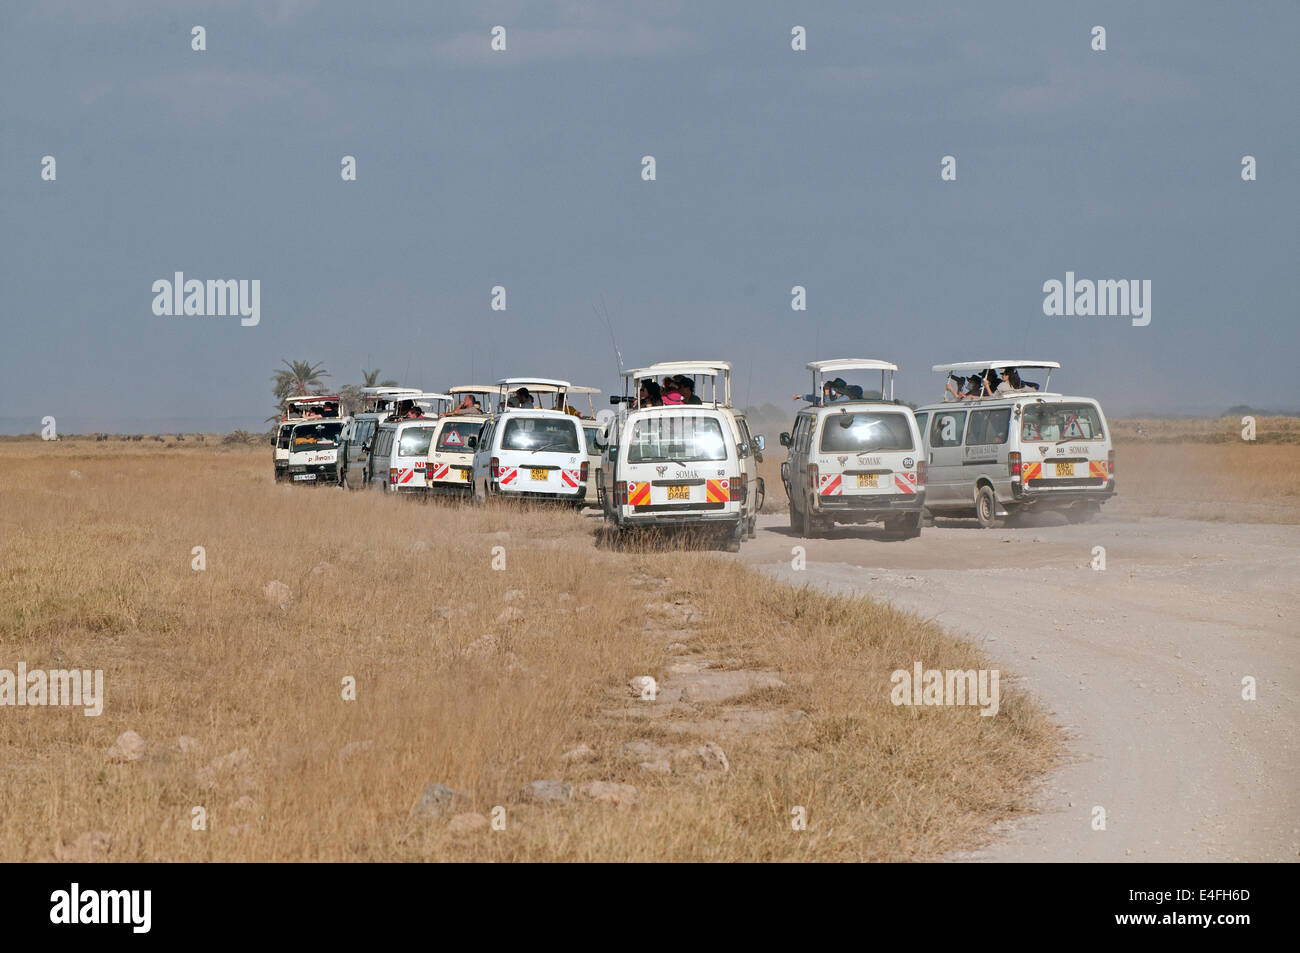 Crowd of 12 white minibuses with tourists watching wildlife in Amboseli National Park Kenya East Africa Stock Photo